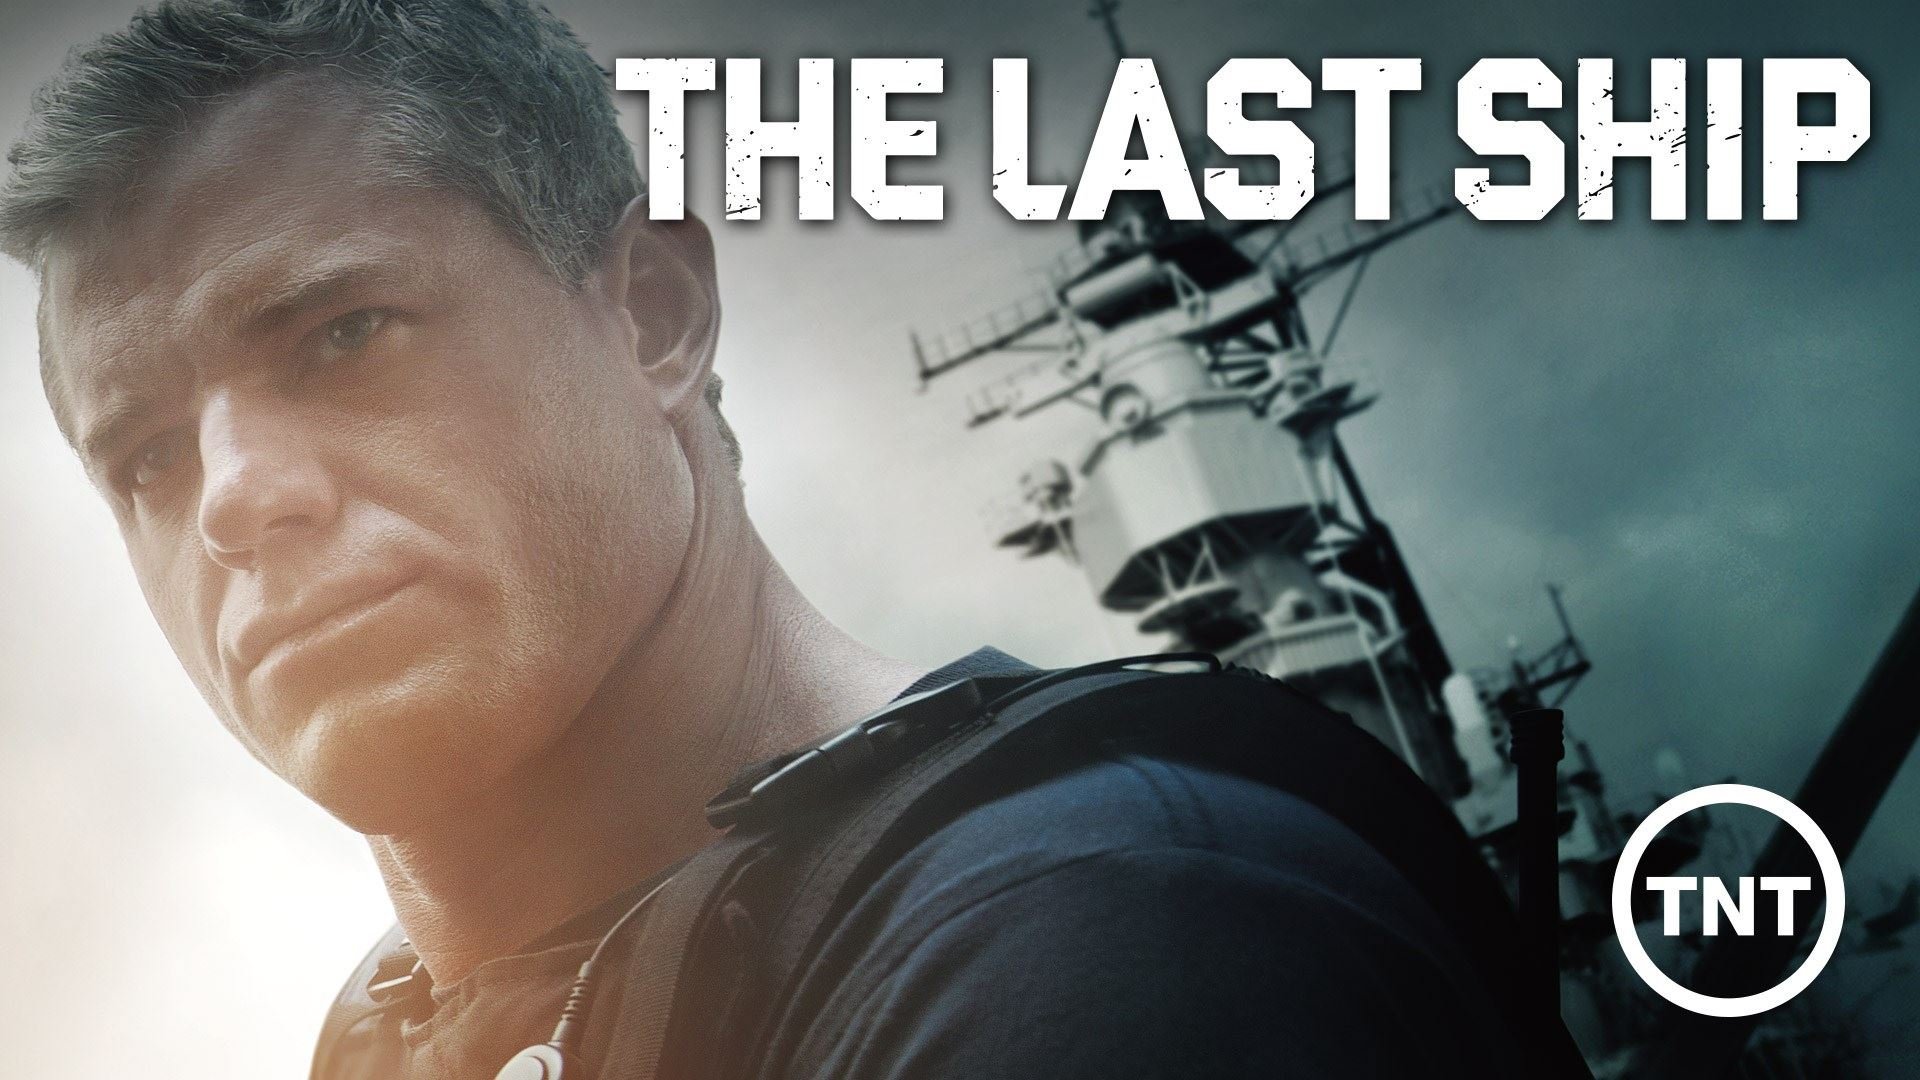 the, Last, Ship, Military, Navy, Series, Action, Drama, Apocalyptic, Sci fi, Drama, 1tls, Poster Wallpaper